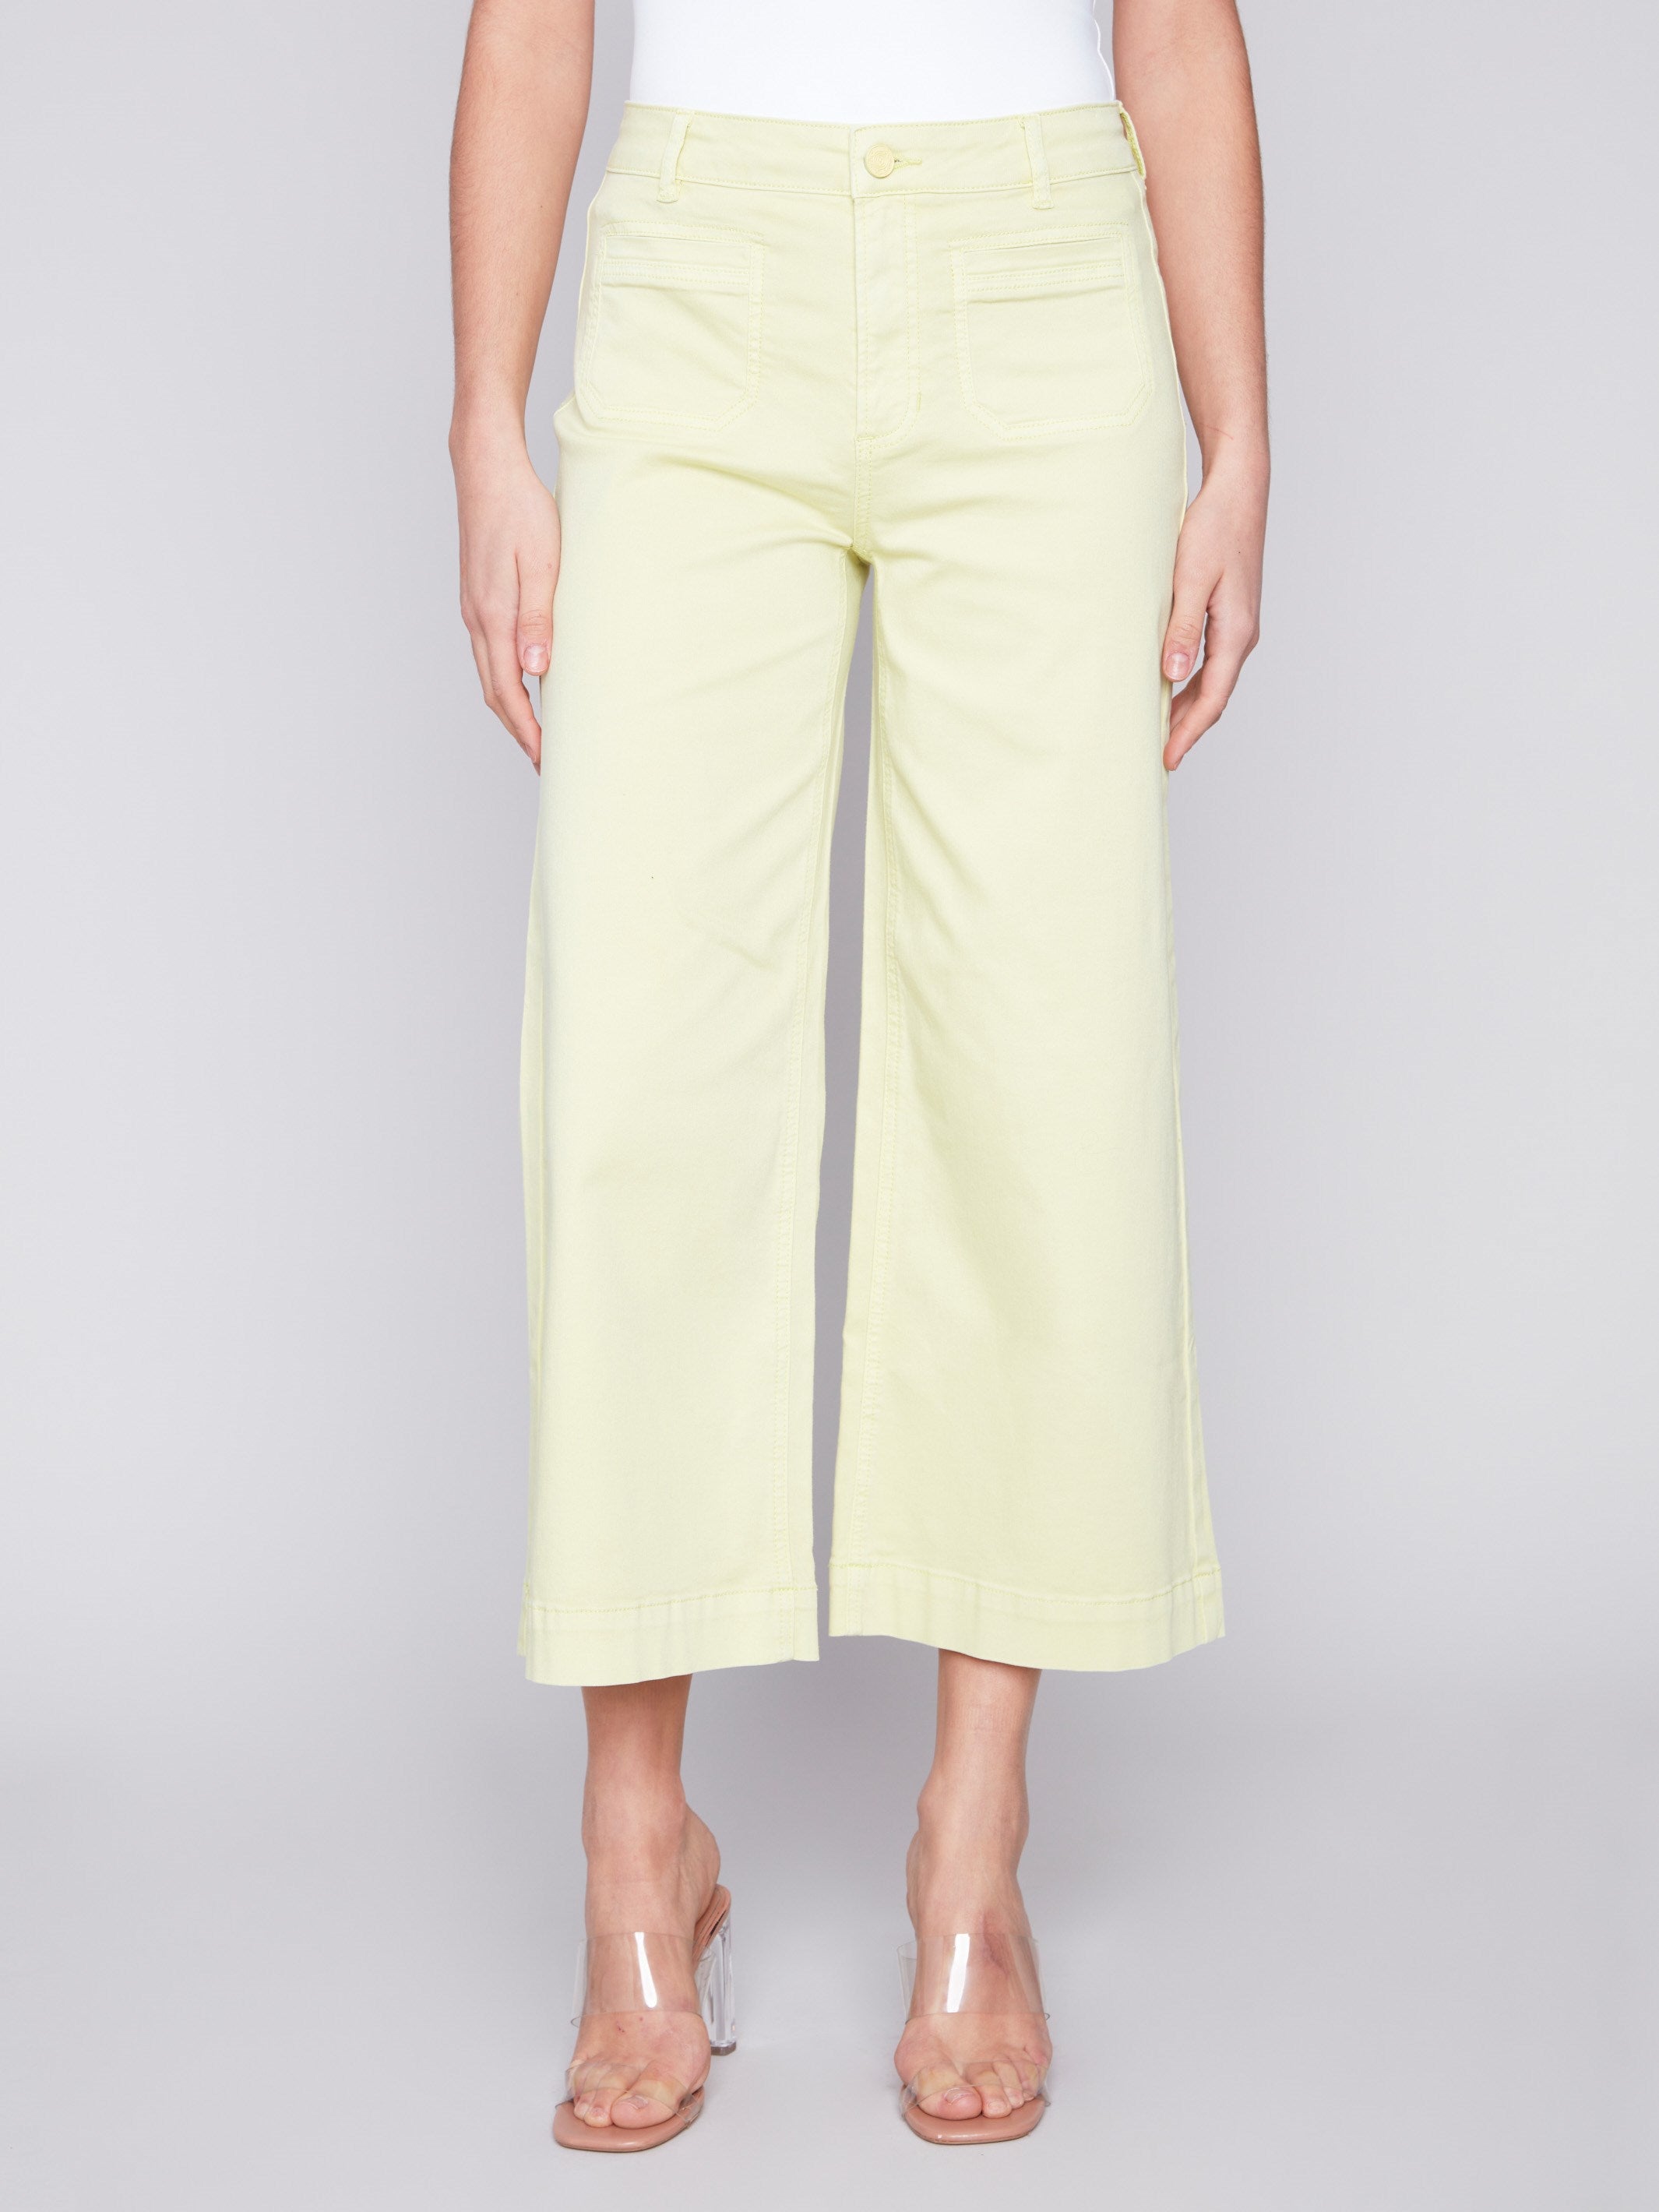 Charlie B Cropped Wide Leg Twill Pants - Anise - Image 2